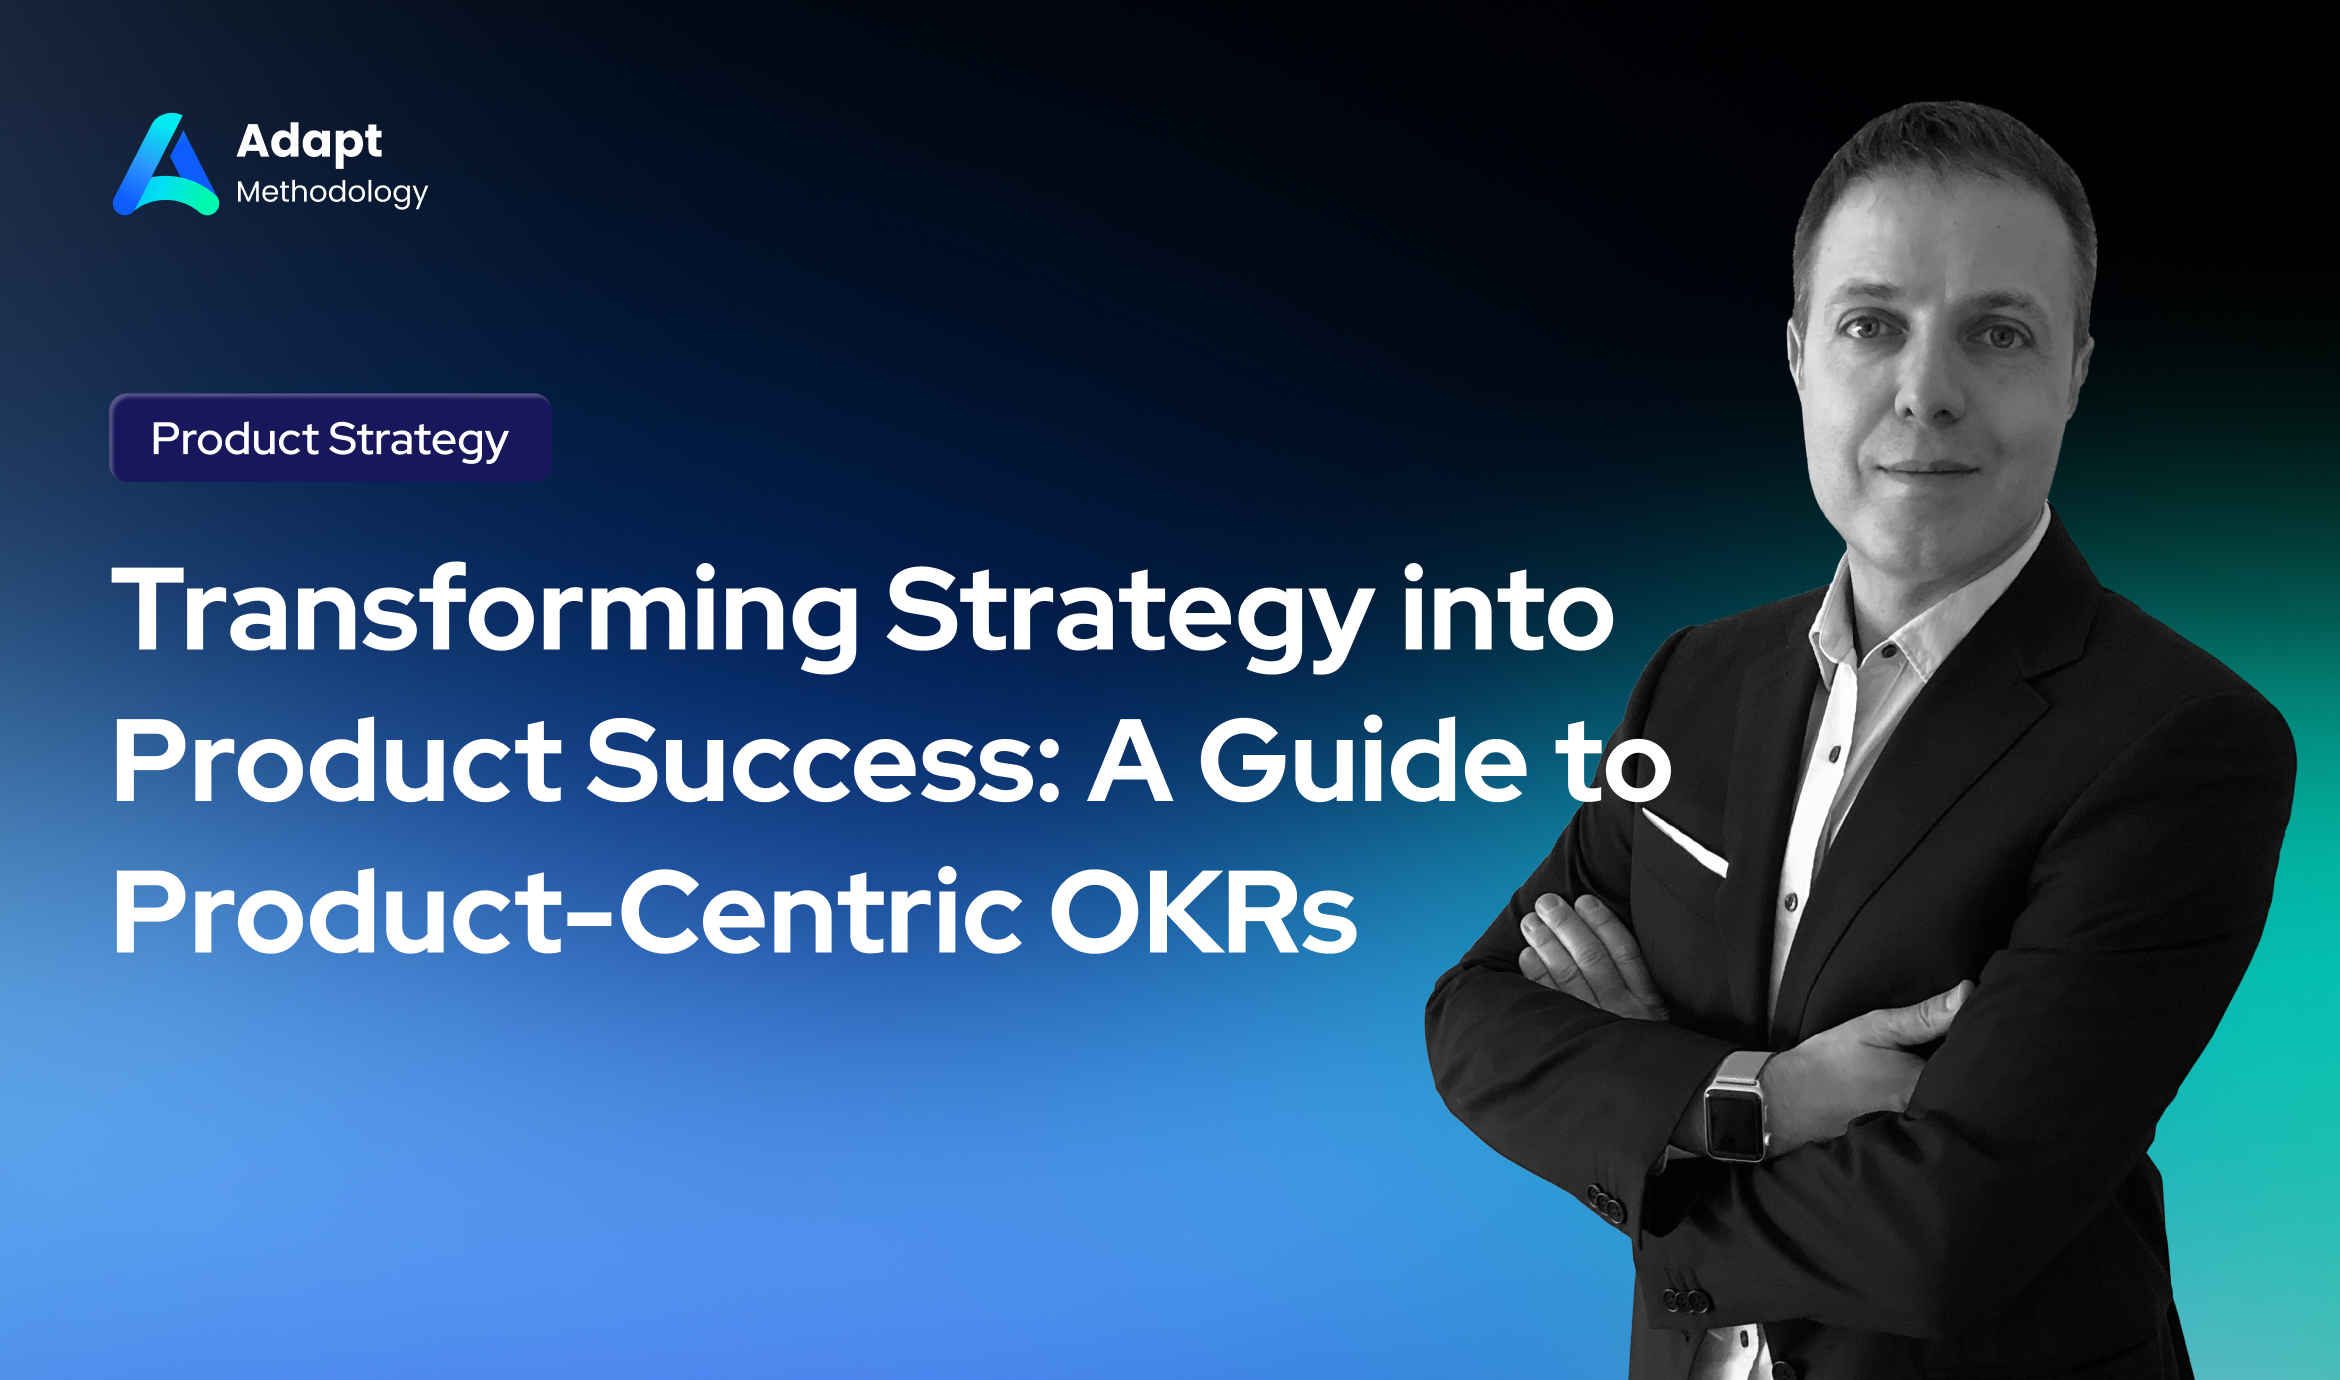 Transforming Strategy into Product Success - A Guide to Product-Centric OKRs